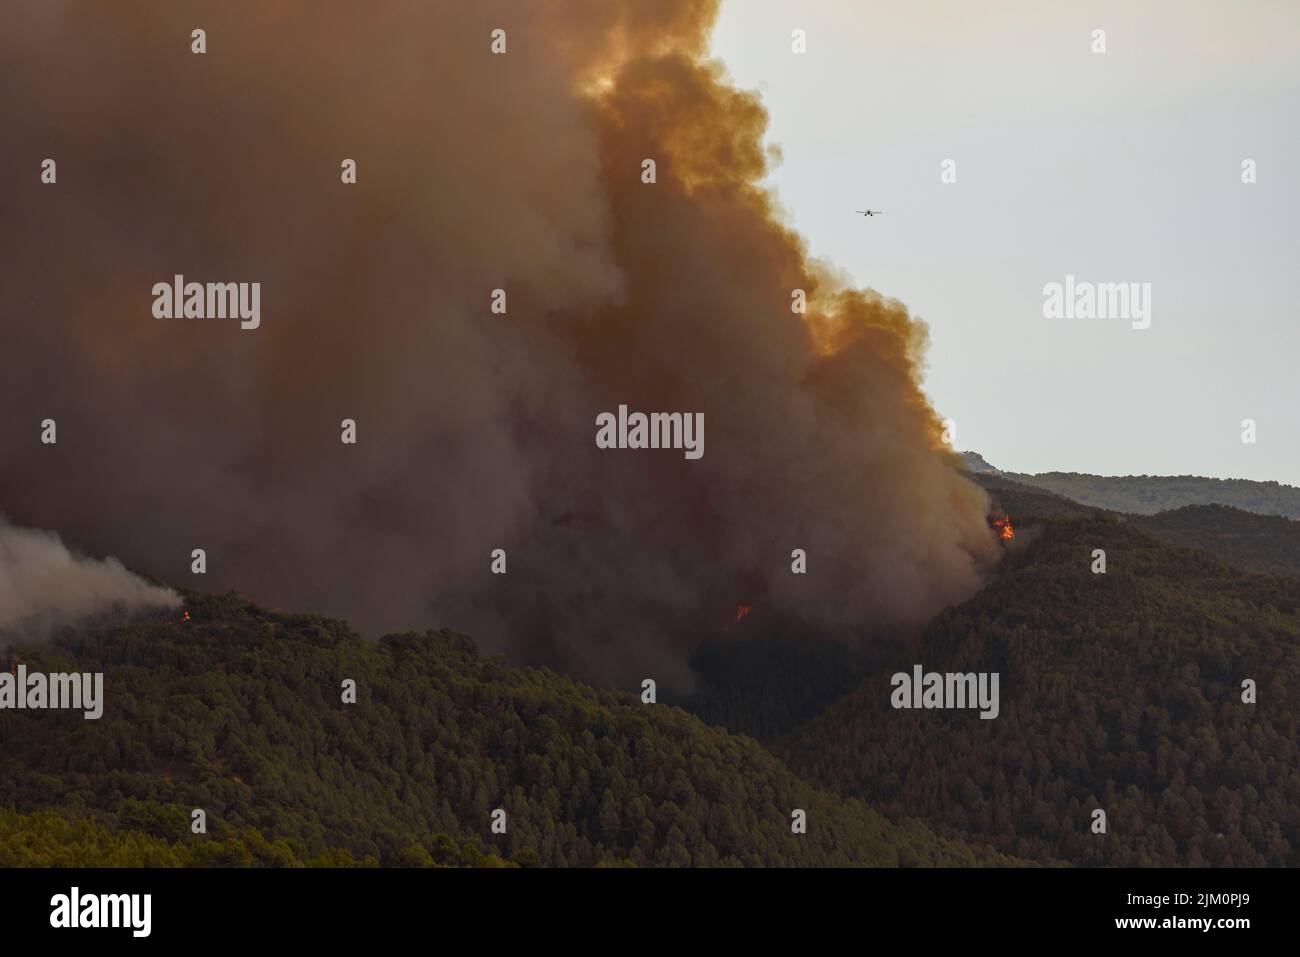 Wildfire of El Pont de Vilomara, on July 17, 2022, which burned 1,743 hectares of vegetation (Bages, Barcelona, Catalonia, Spain) Stock Photo